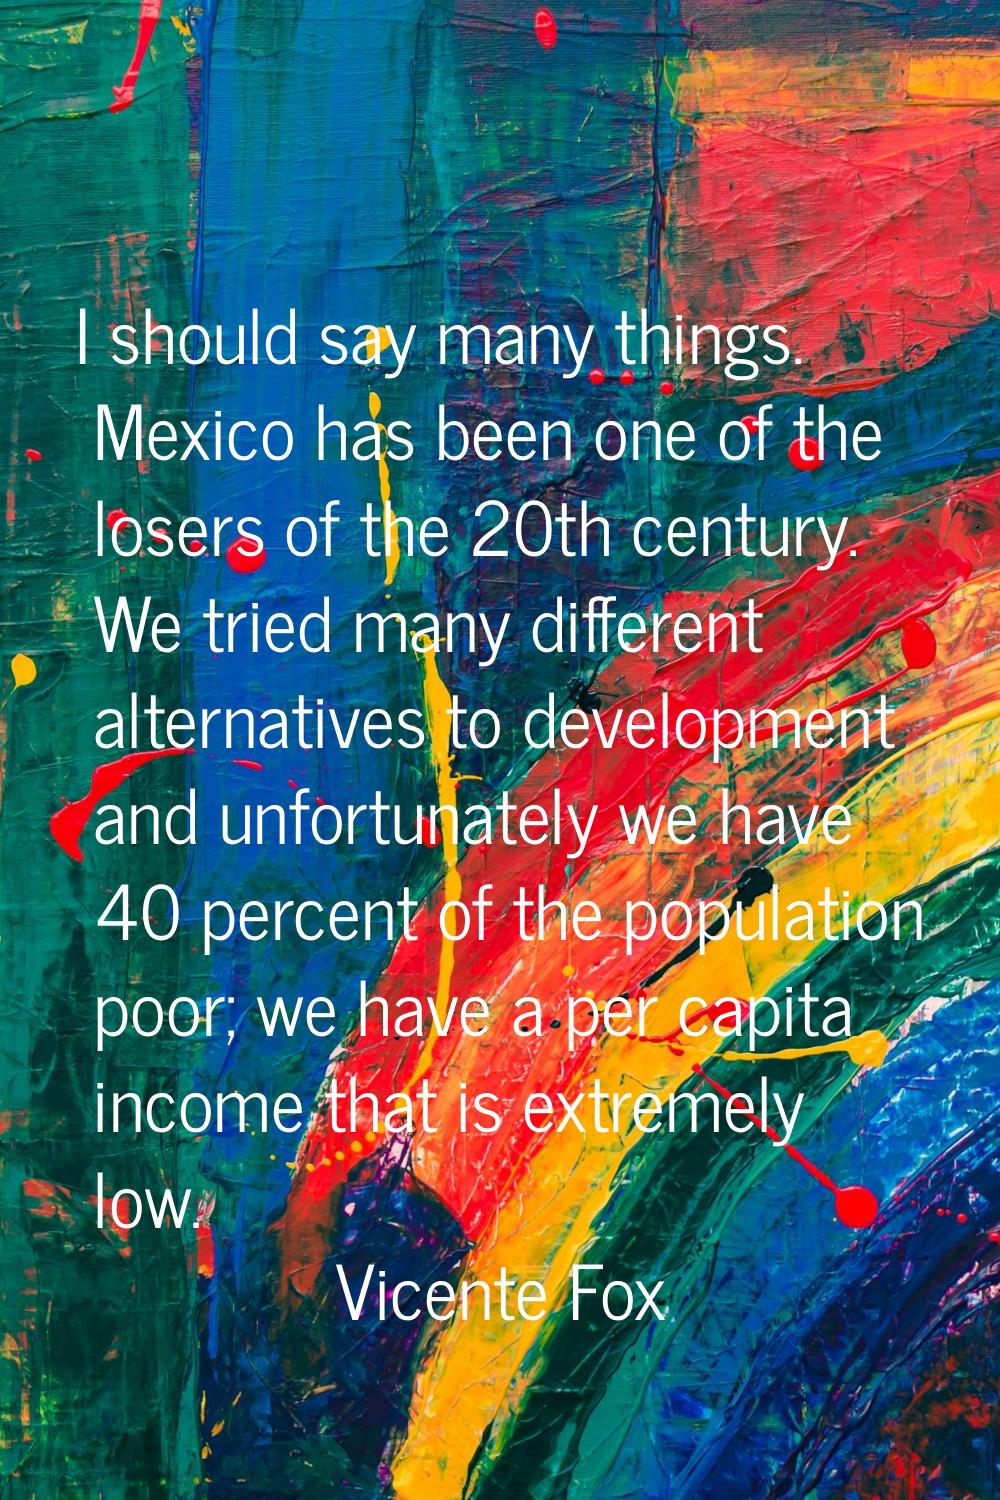 I should say many things. Mexico has been one of the losers of the 20th century. We tried many diff